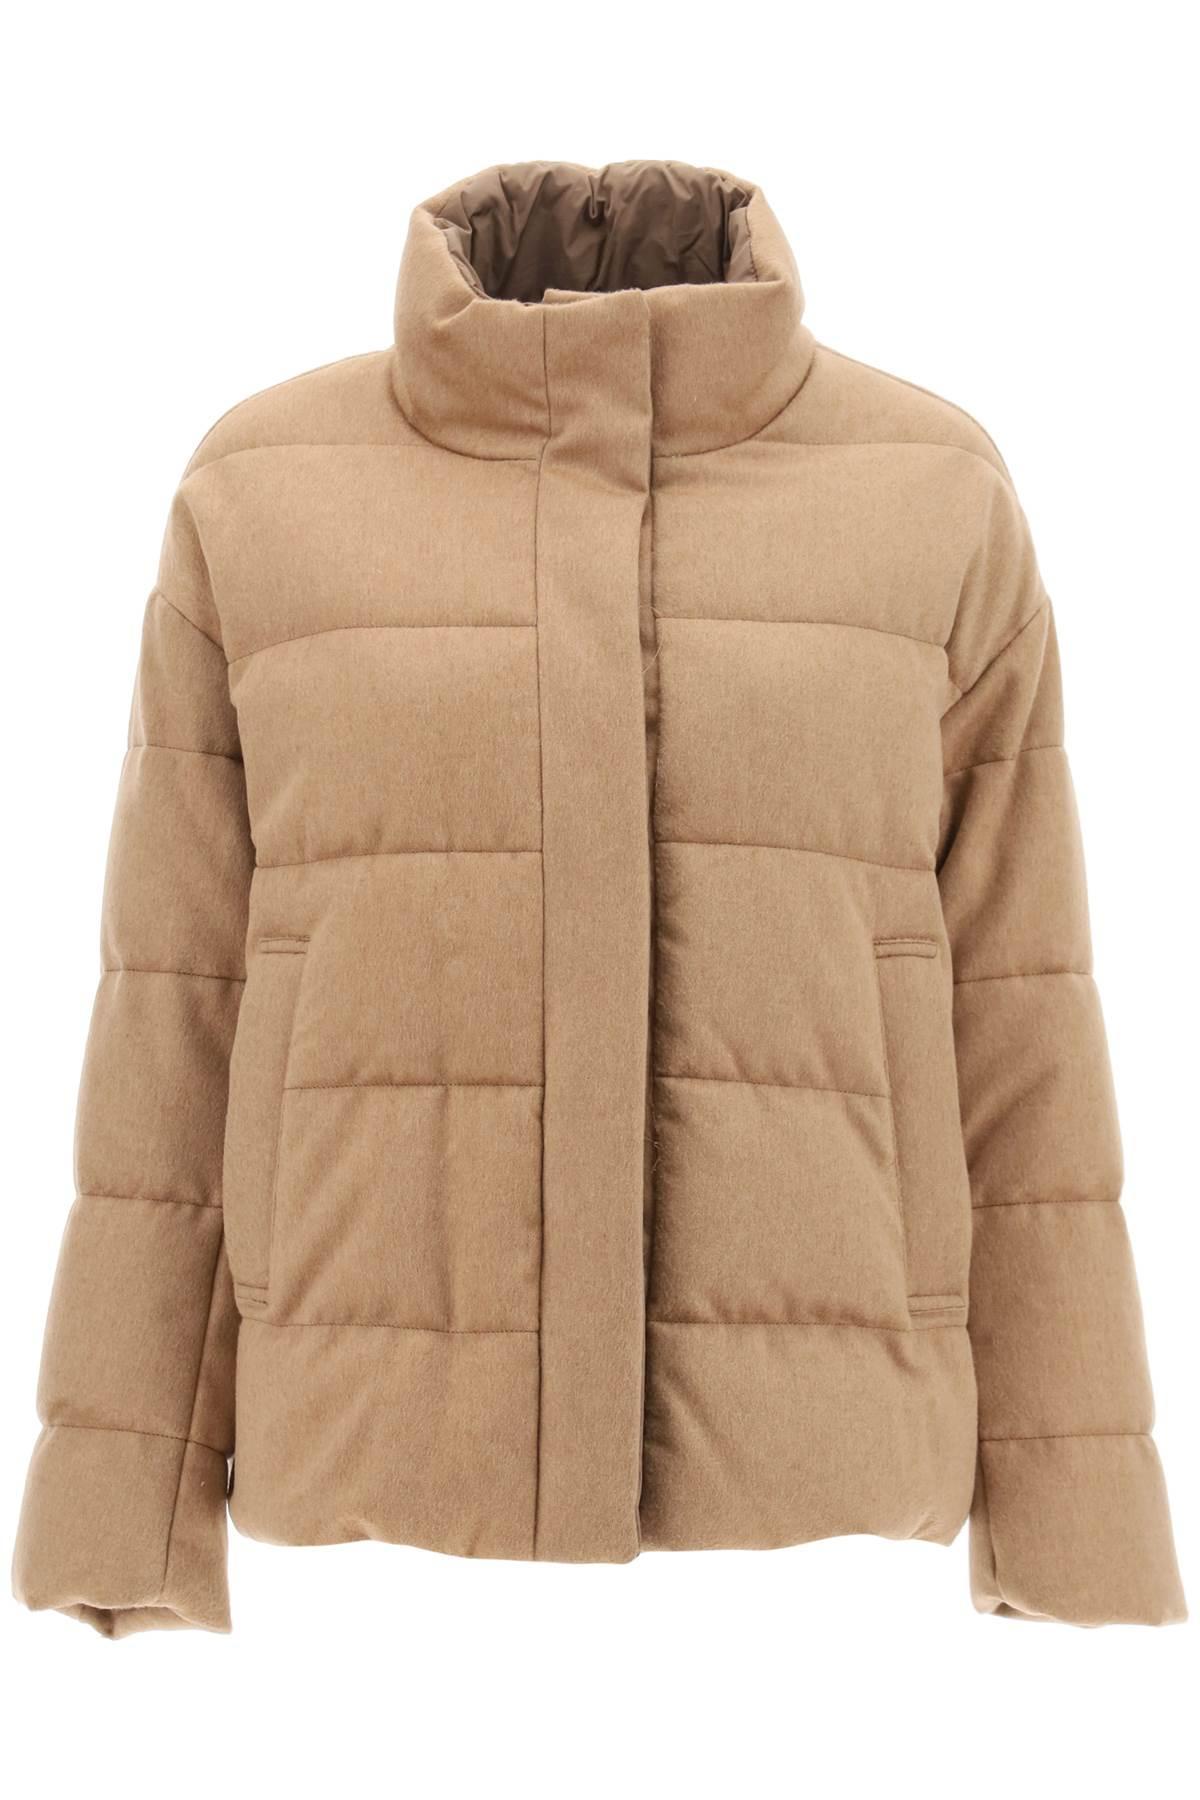 Max Mara The Cube 'donatello' Reversible Puffer Jacket in Brown | Lyst